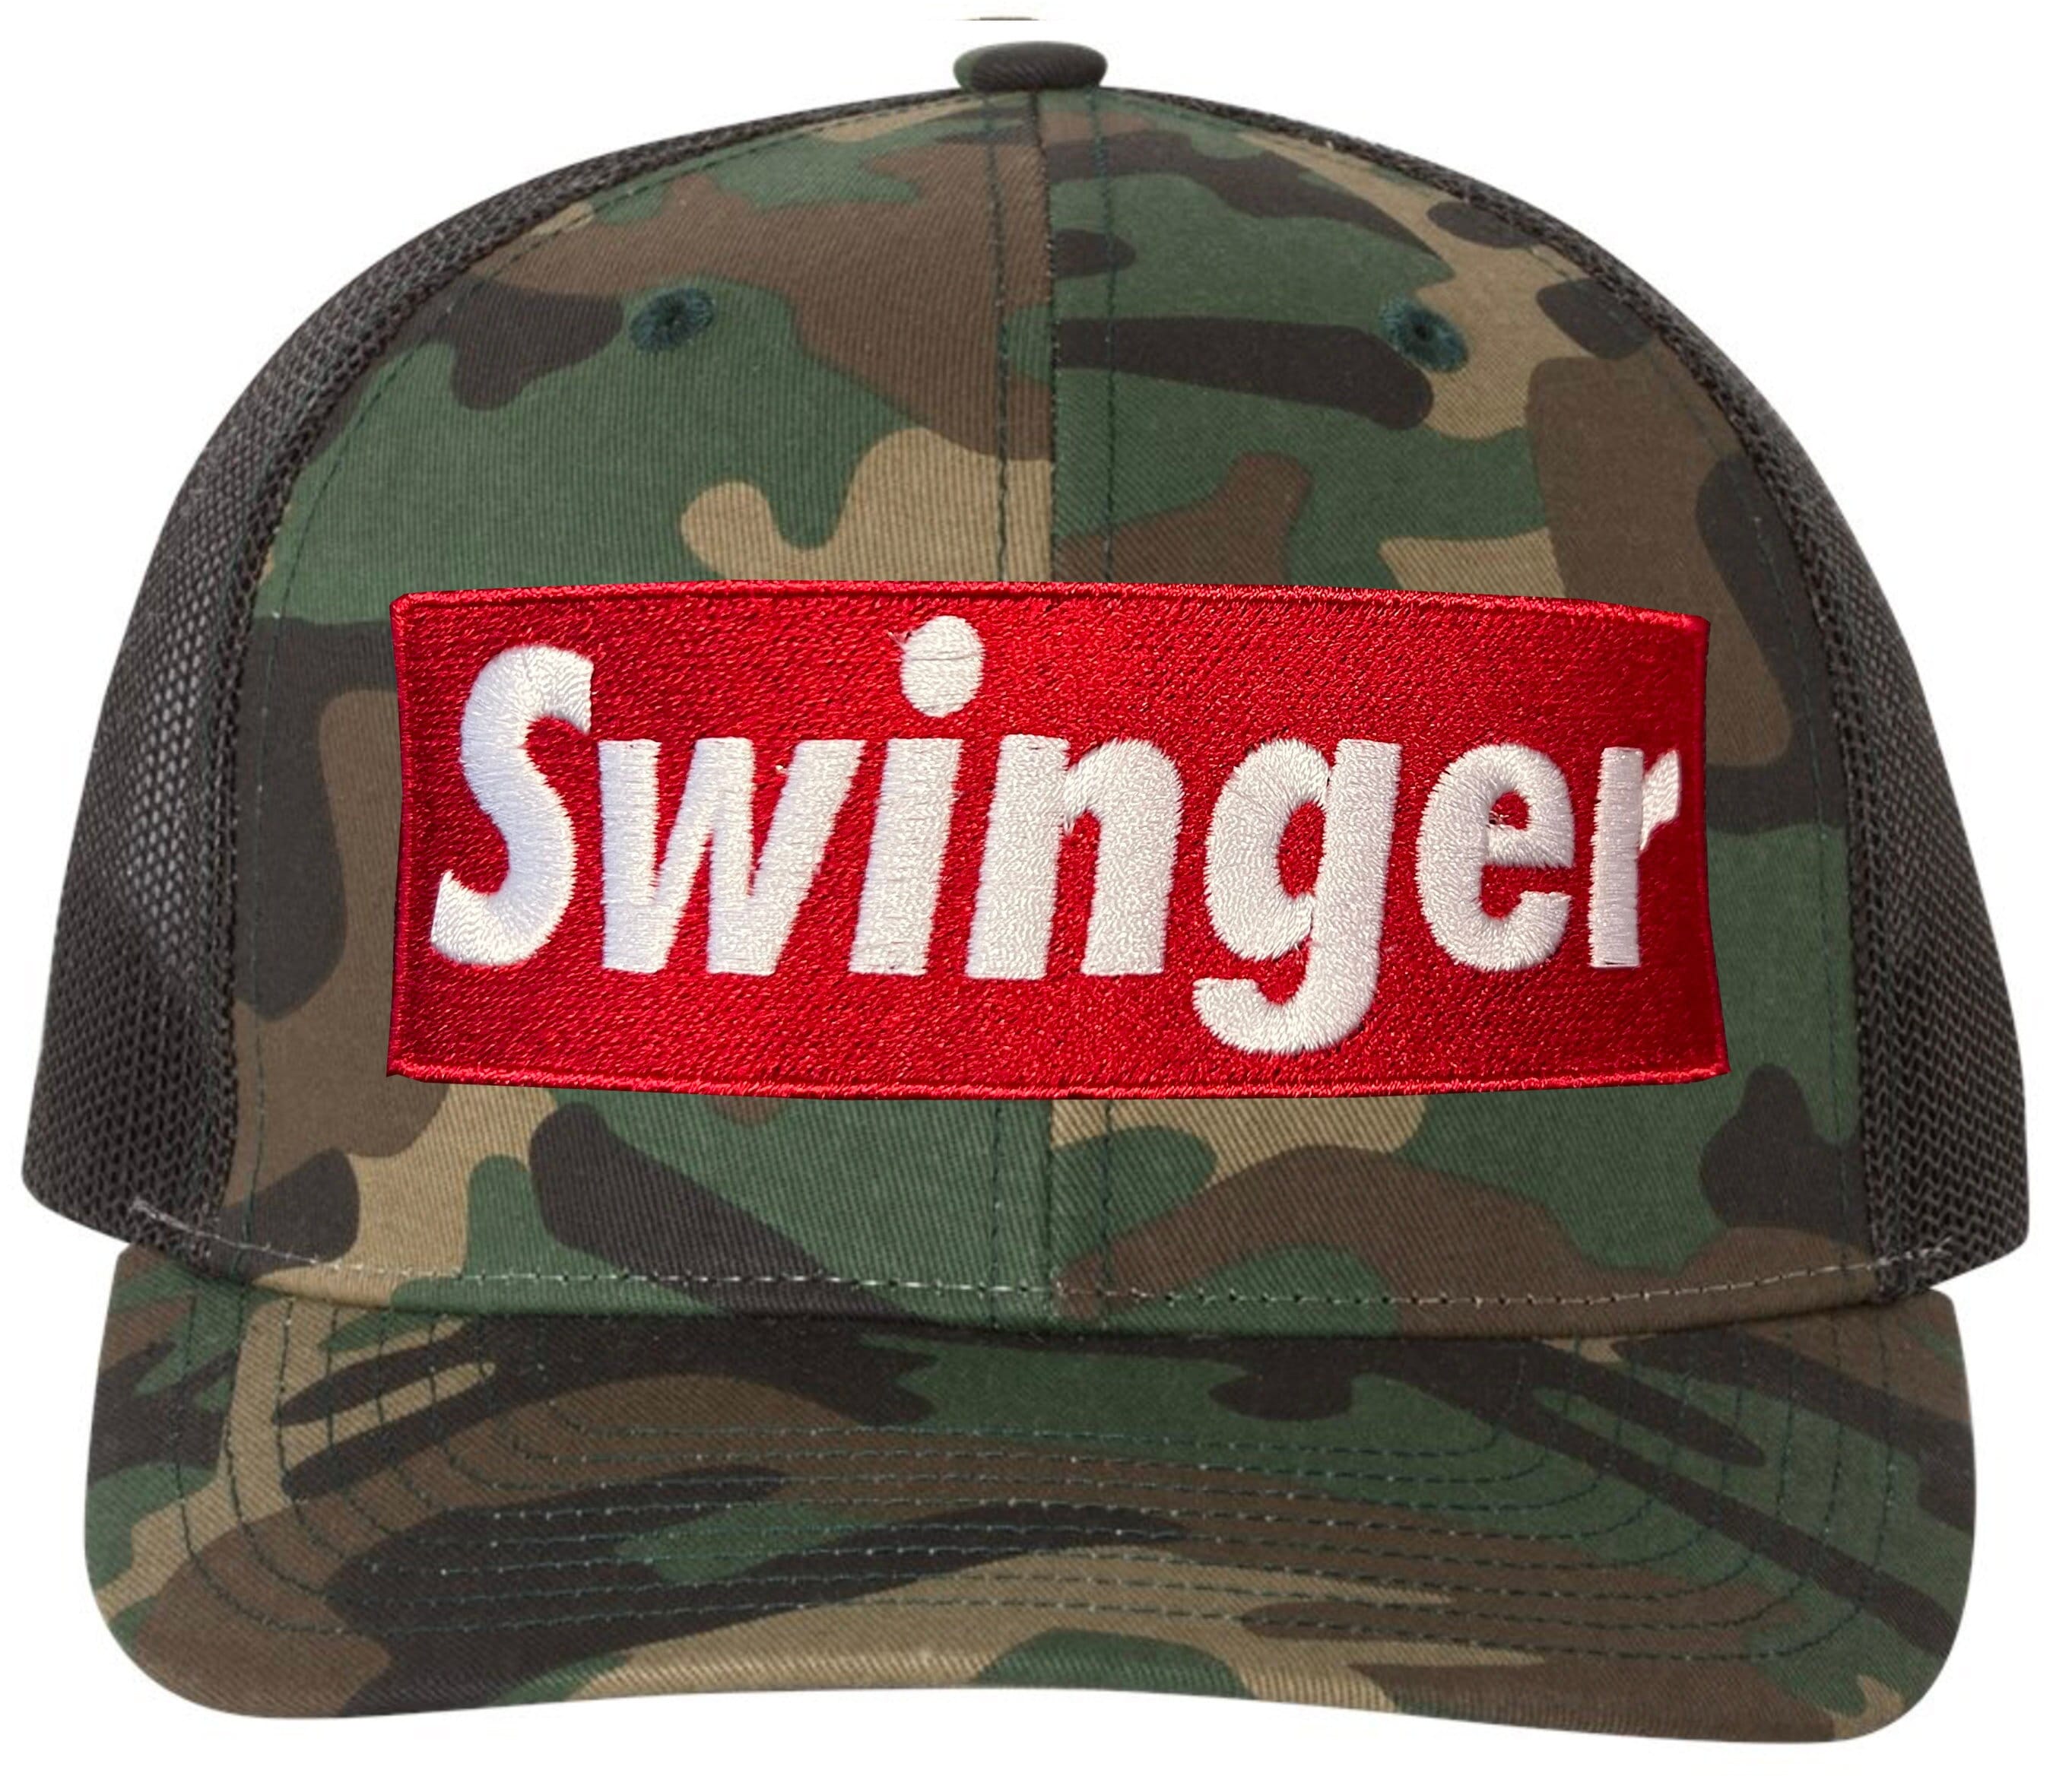 Embroidered SWINGER Camo Hat Adult Mature Hat